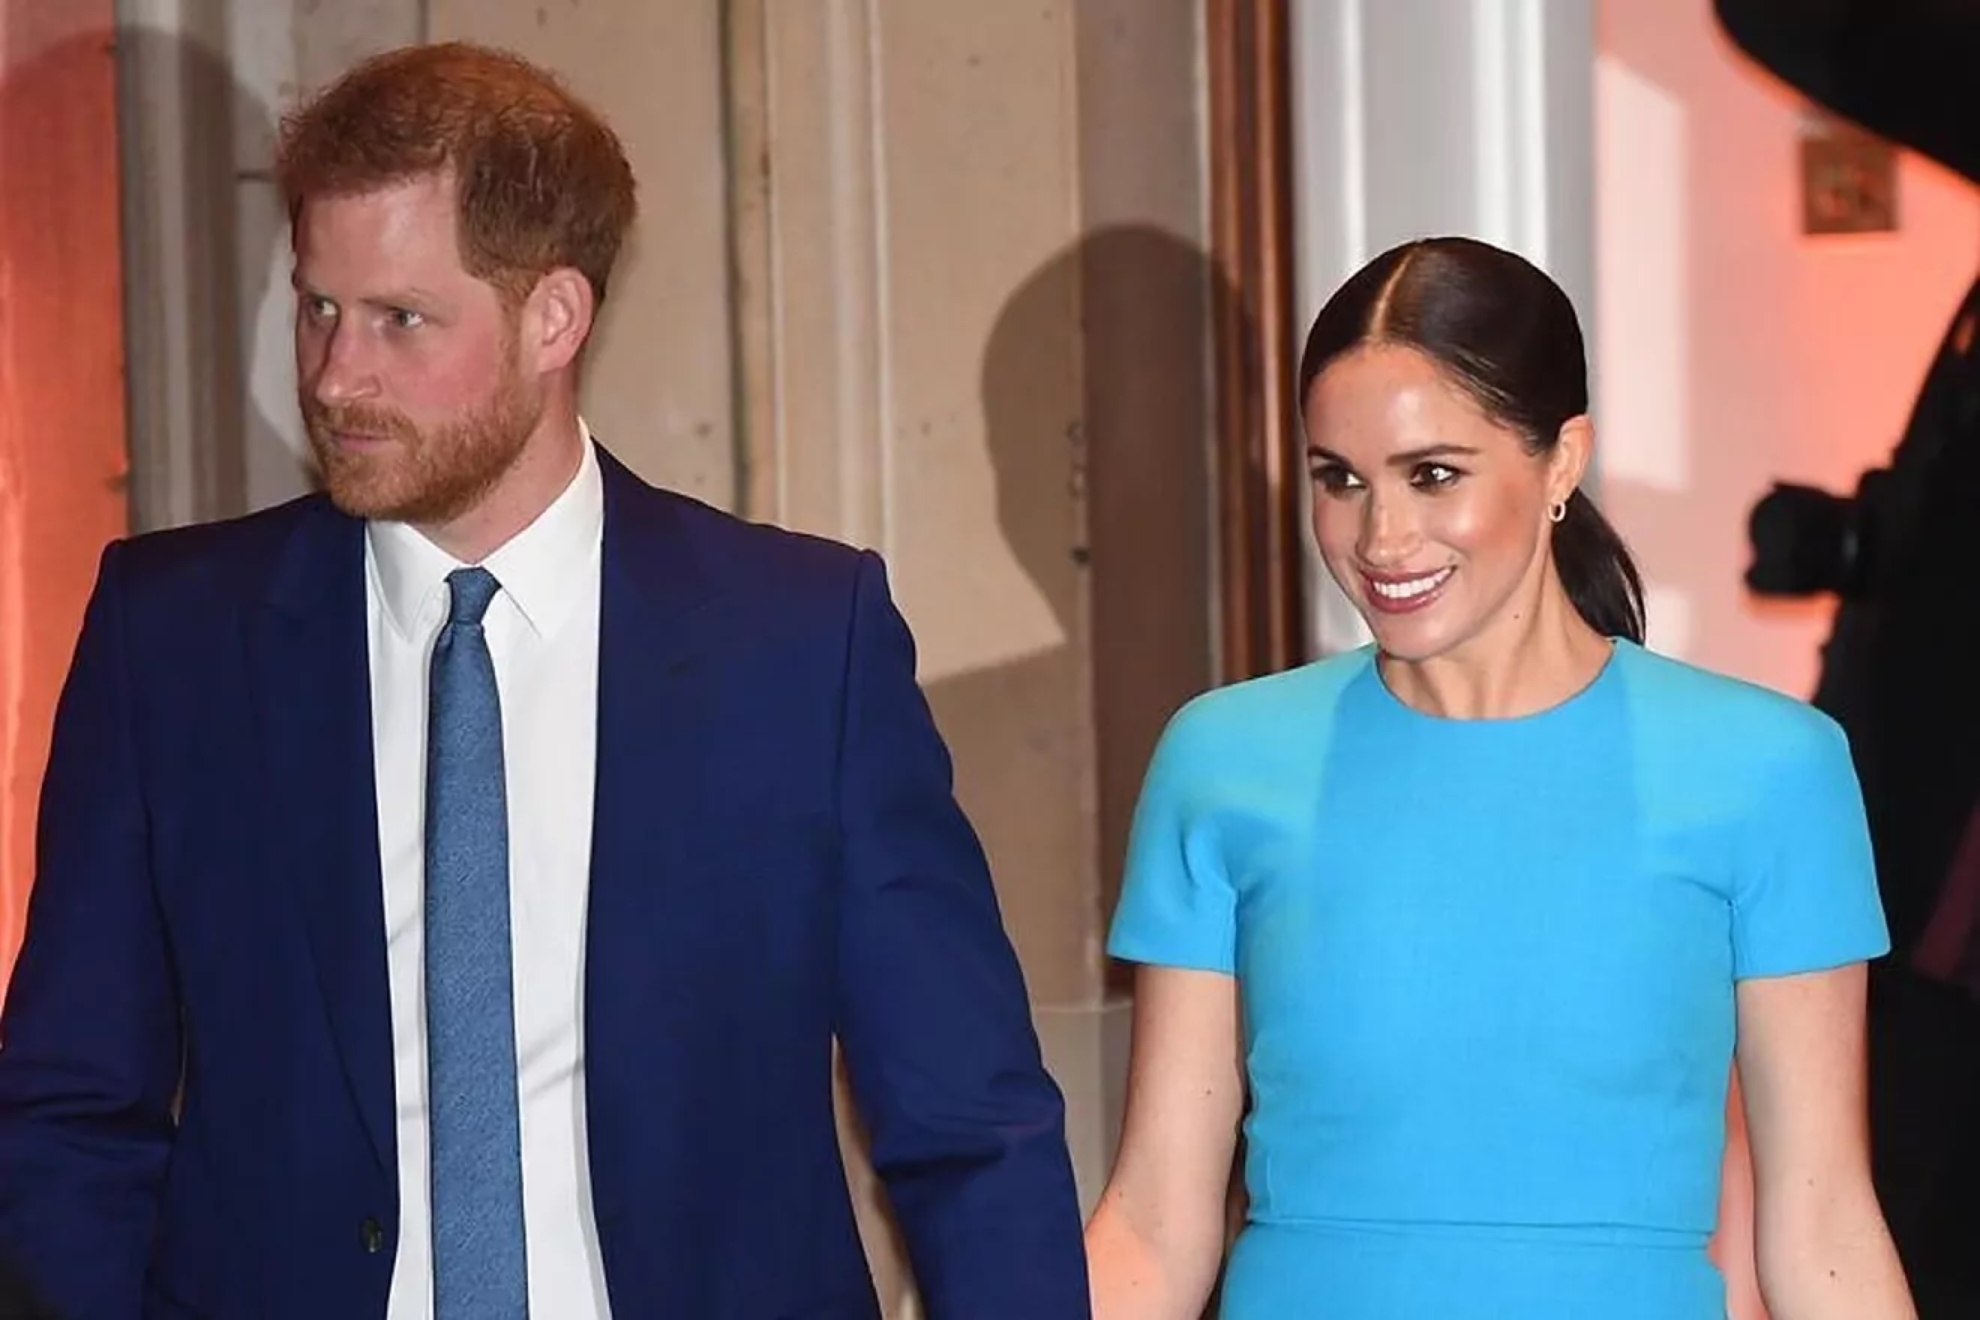 Prince Harry and Meghan Markle at a public event.